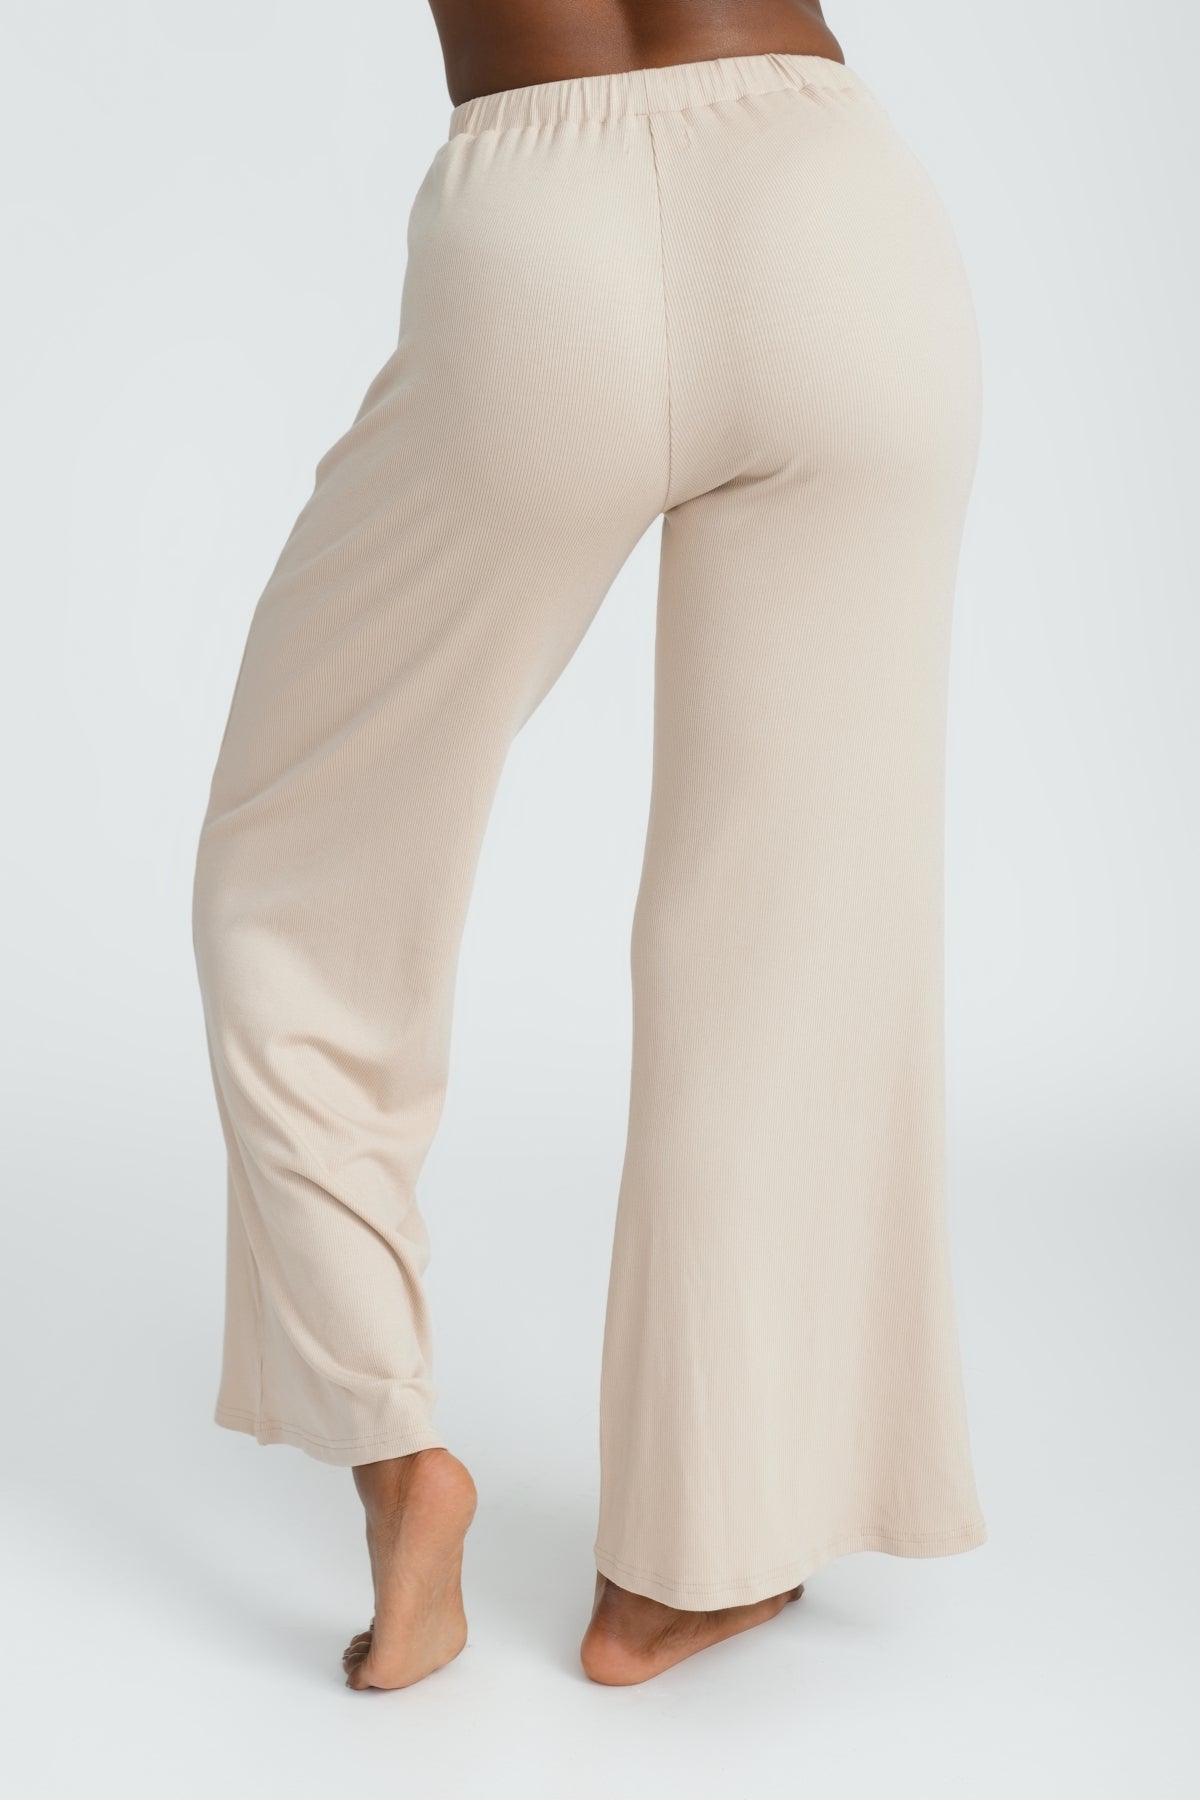 Soft Lounge Pant in Coconut Beige